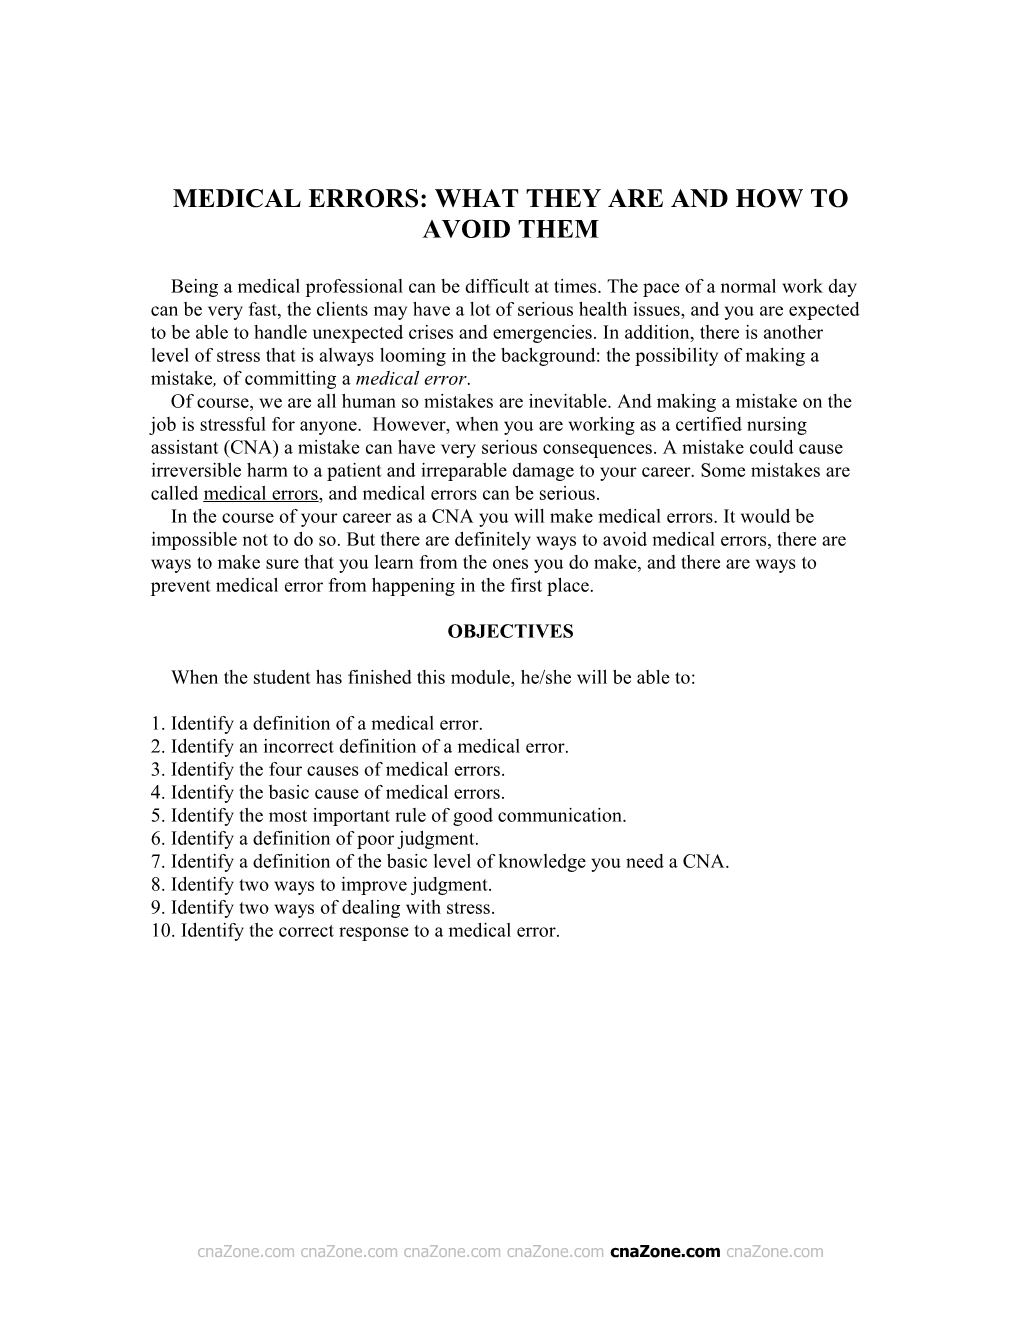 Medical Errors: What Theyare and How to Avoid Them